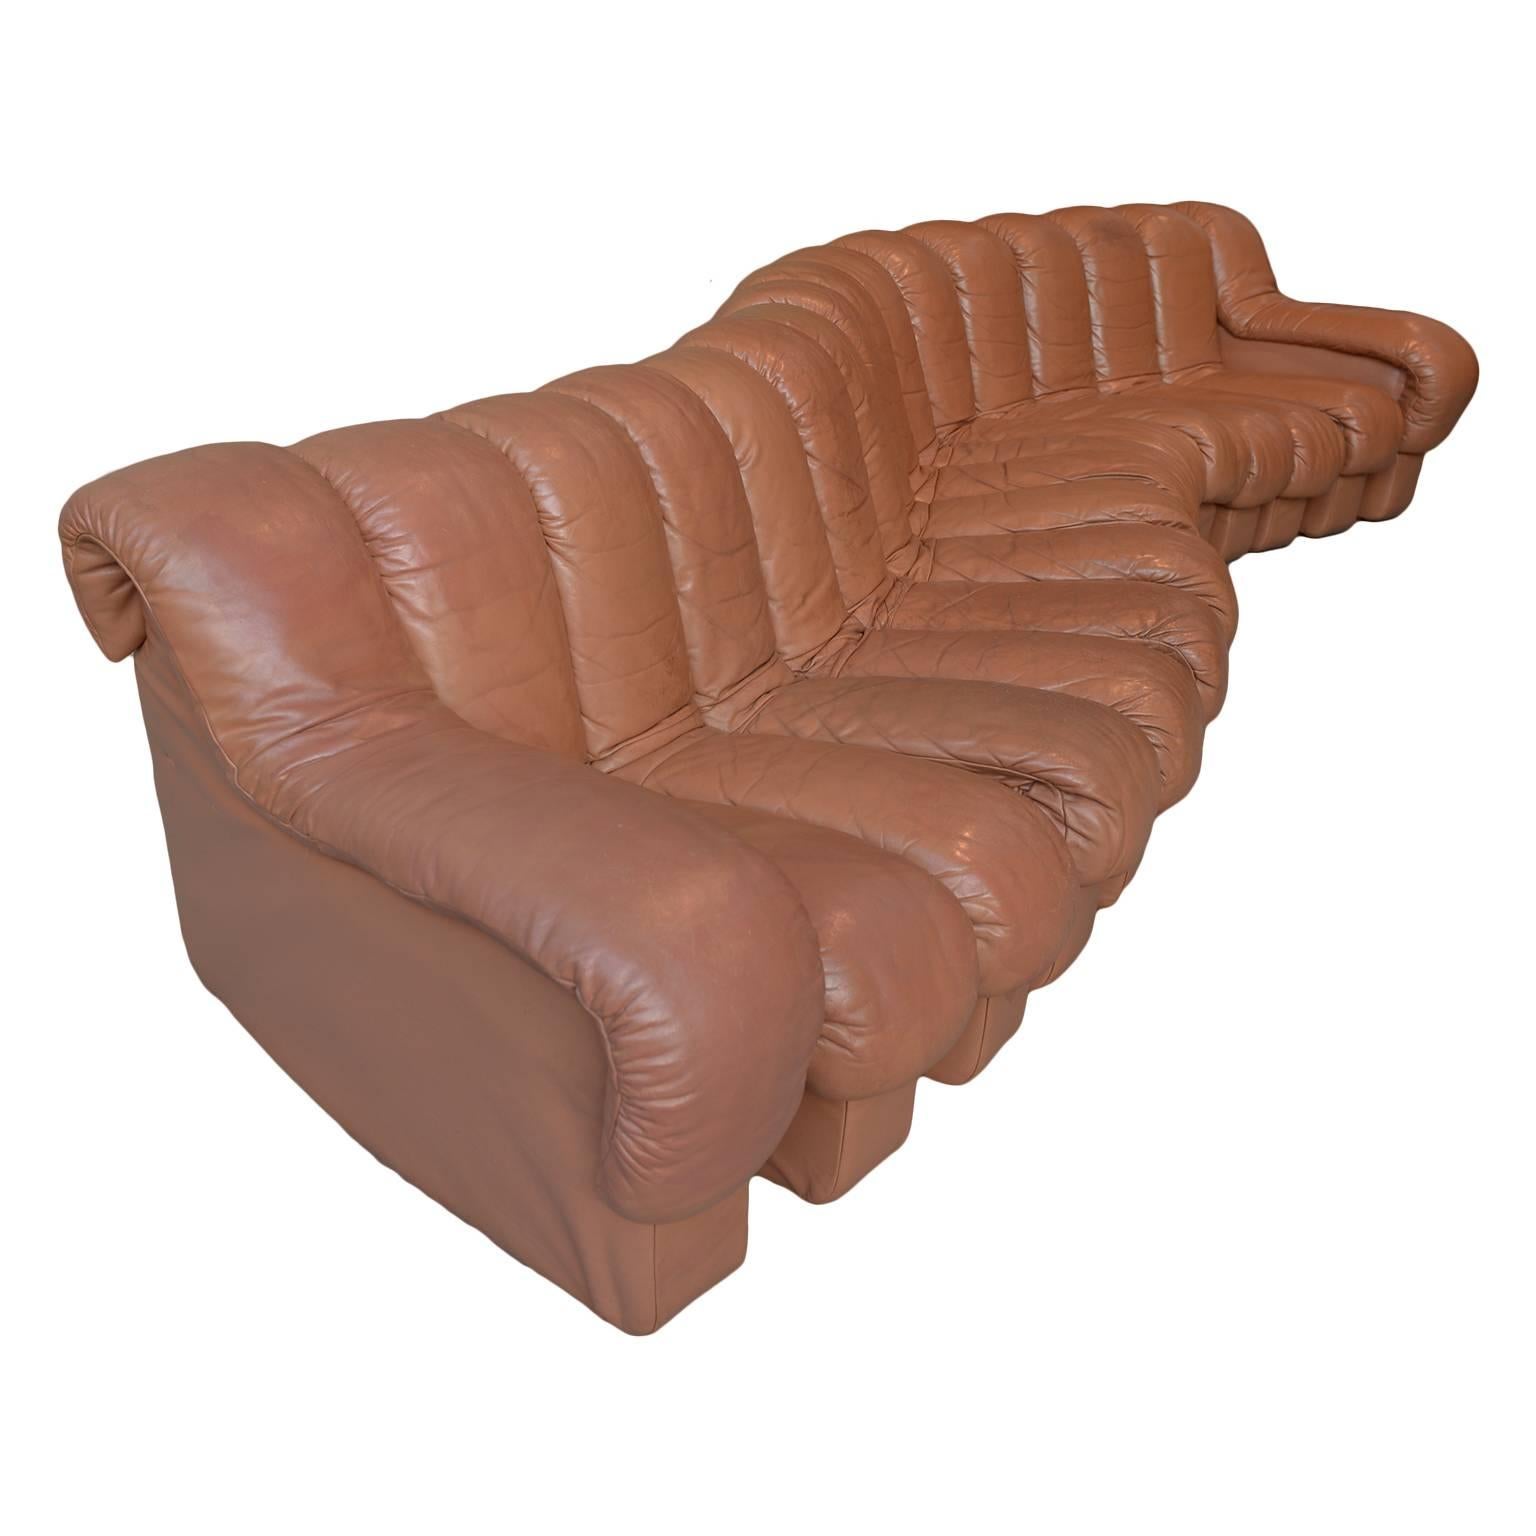 De Sede Ds600 Ueli bergere "Non-Stop" sofa, 16 pieces, full leather upholstery with some small damages.